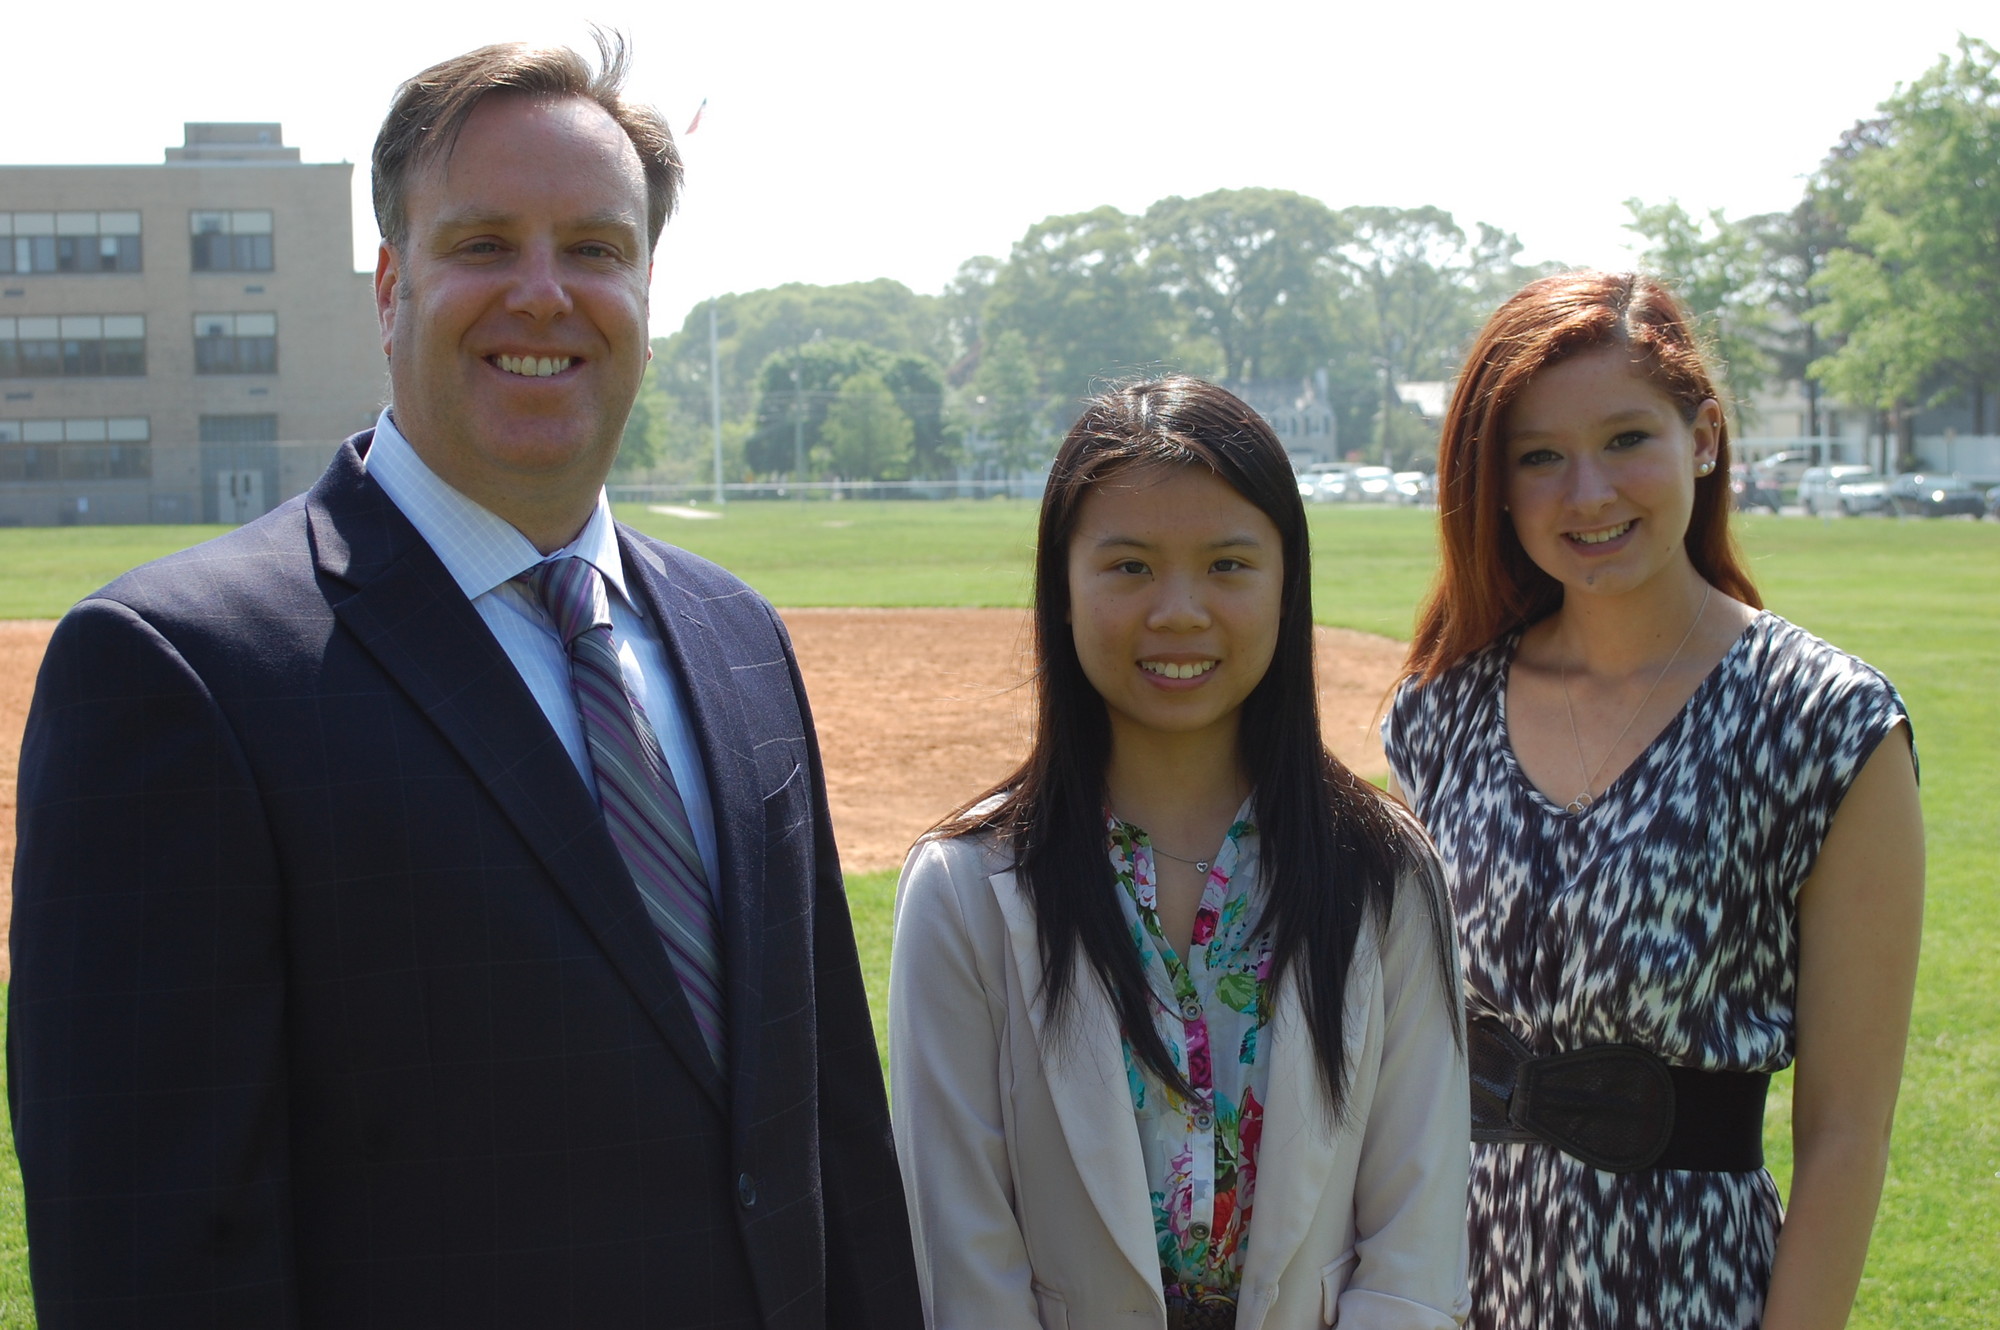 Michelle Chen, center, and Angelica Caluori are the valedictorian and salutatorian, respectively, of North High School’s class of 2013. They are joined by Superintendent Dr. Bill Heidenreich.